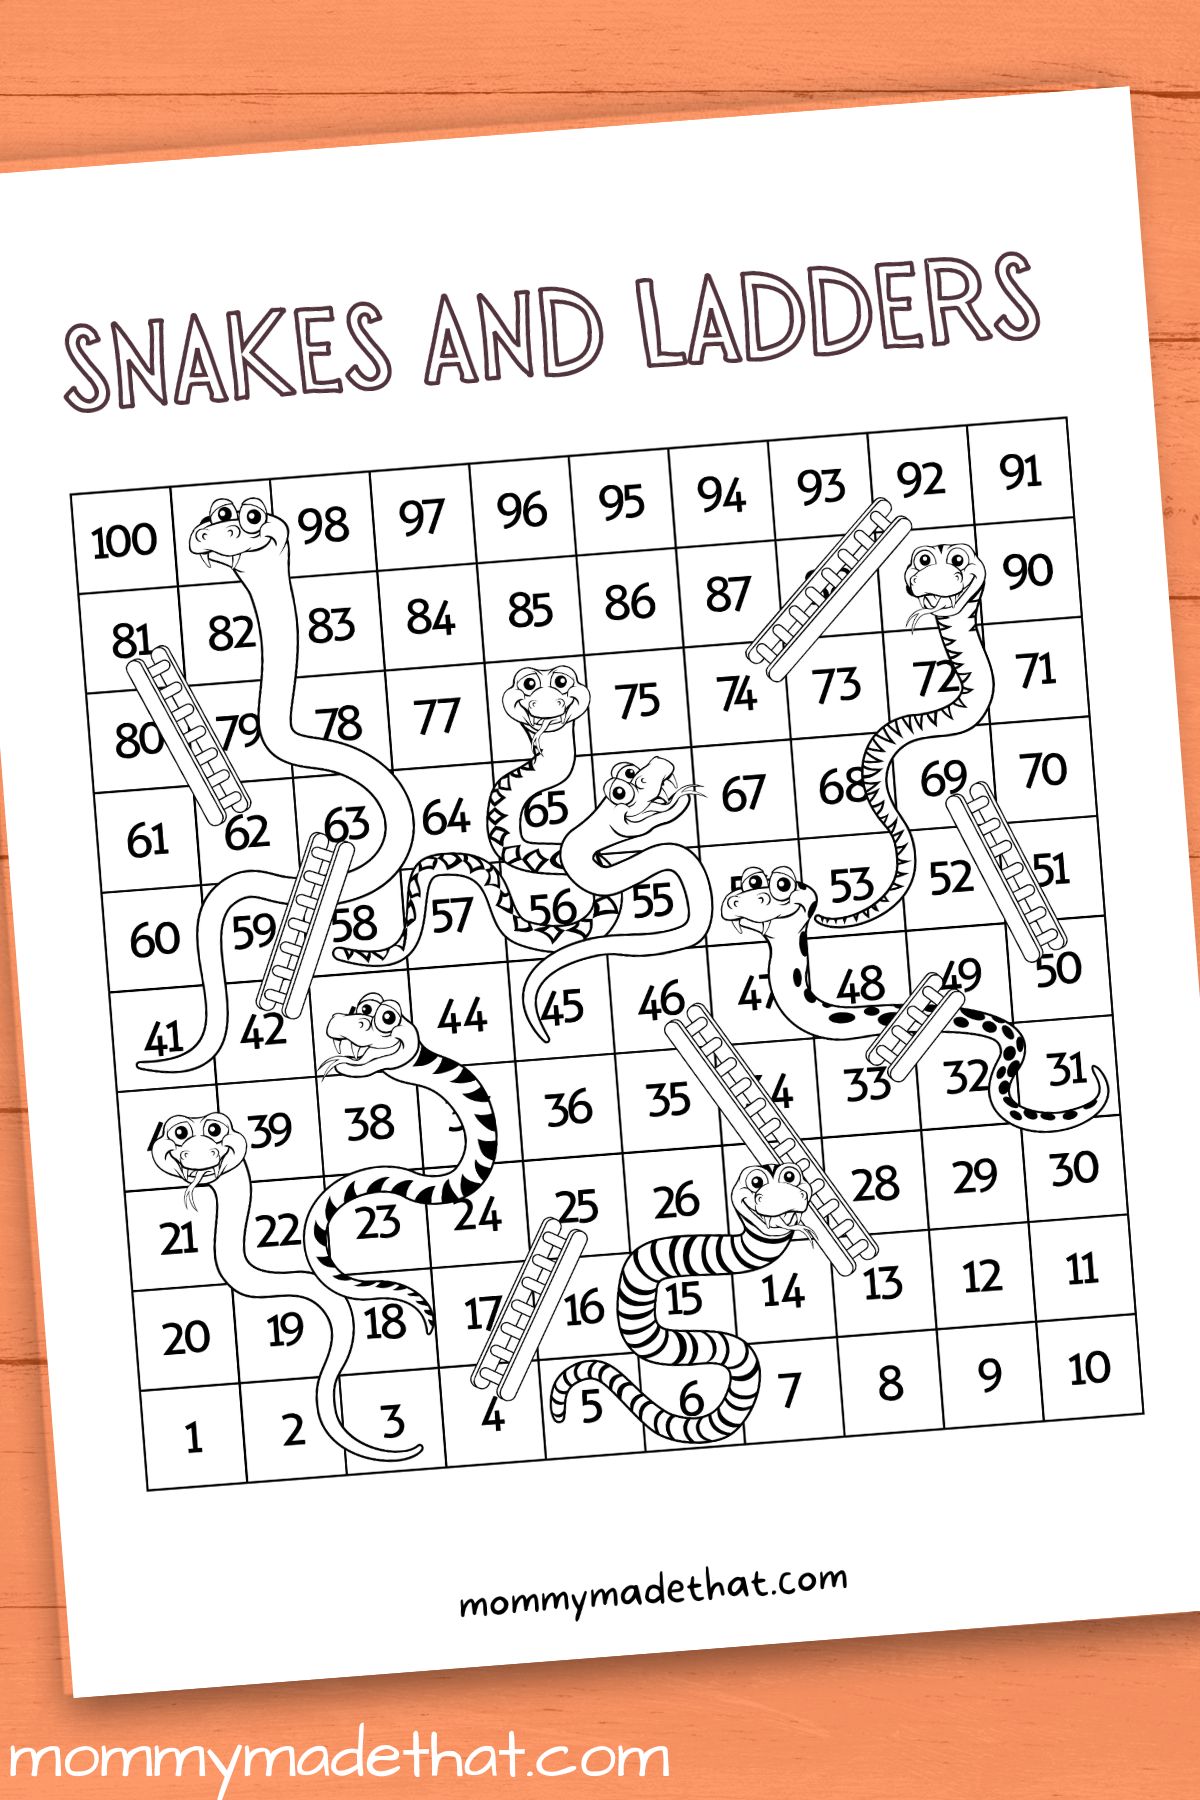 Snakes and ladders printable game board free template